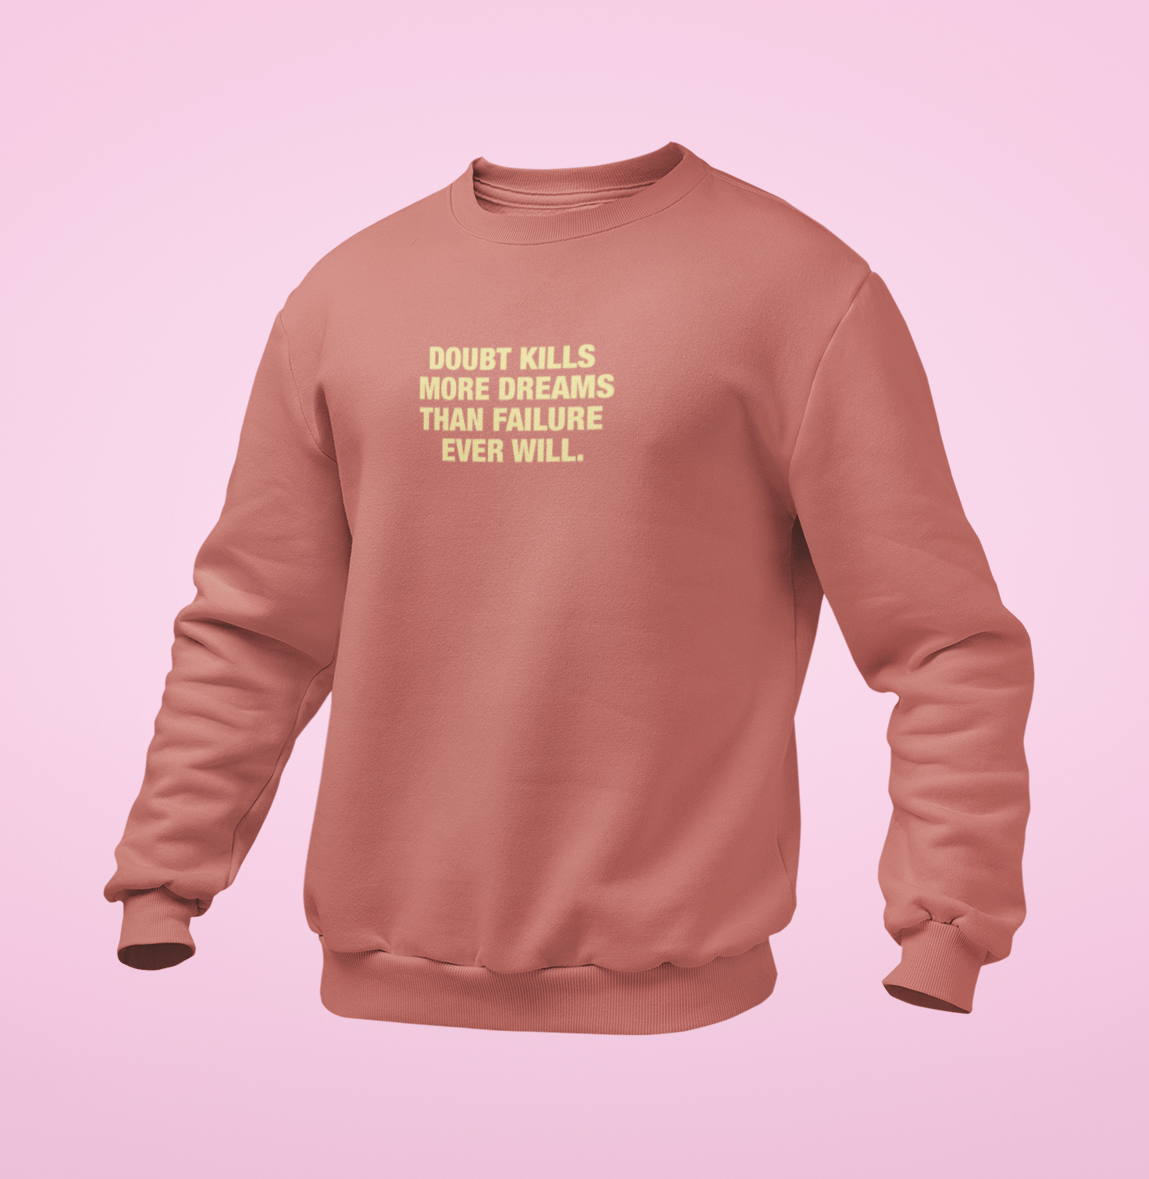 This is The Remix Sweatshirt DOUBT KILLS MORE DREAMS THAN FAILURE EVER WILL - Unisex Sweatshirt in Mauve